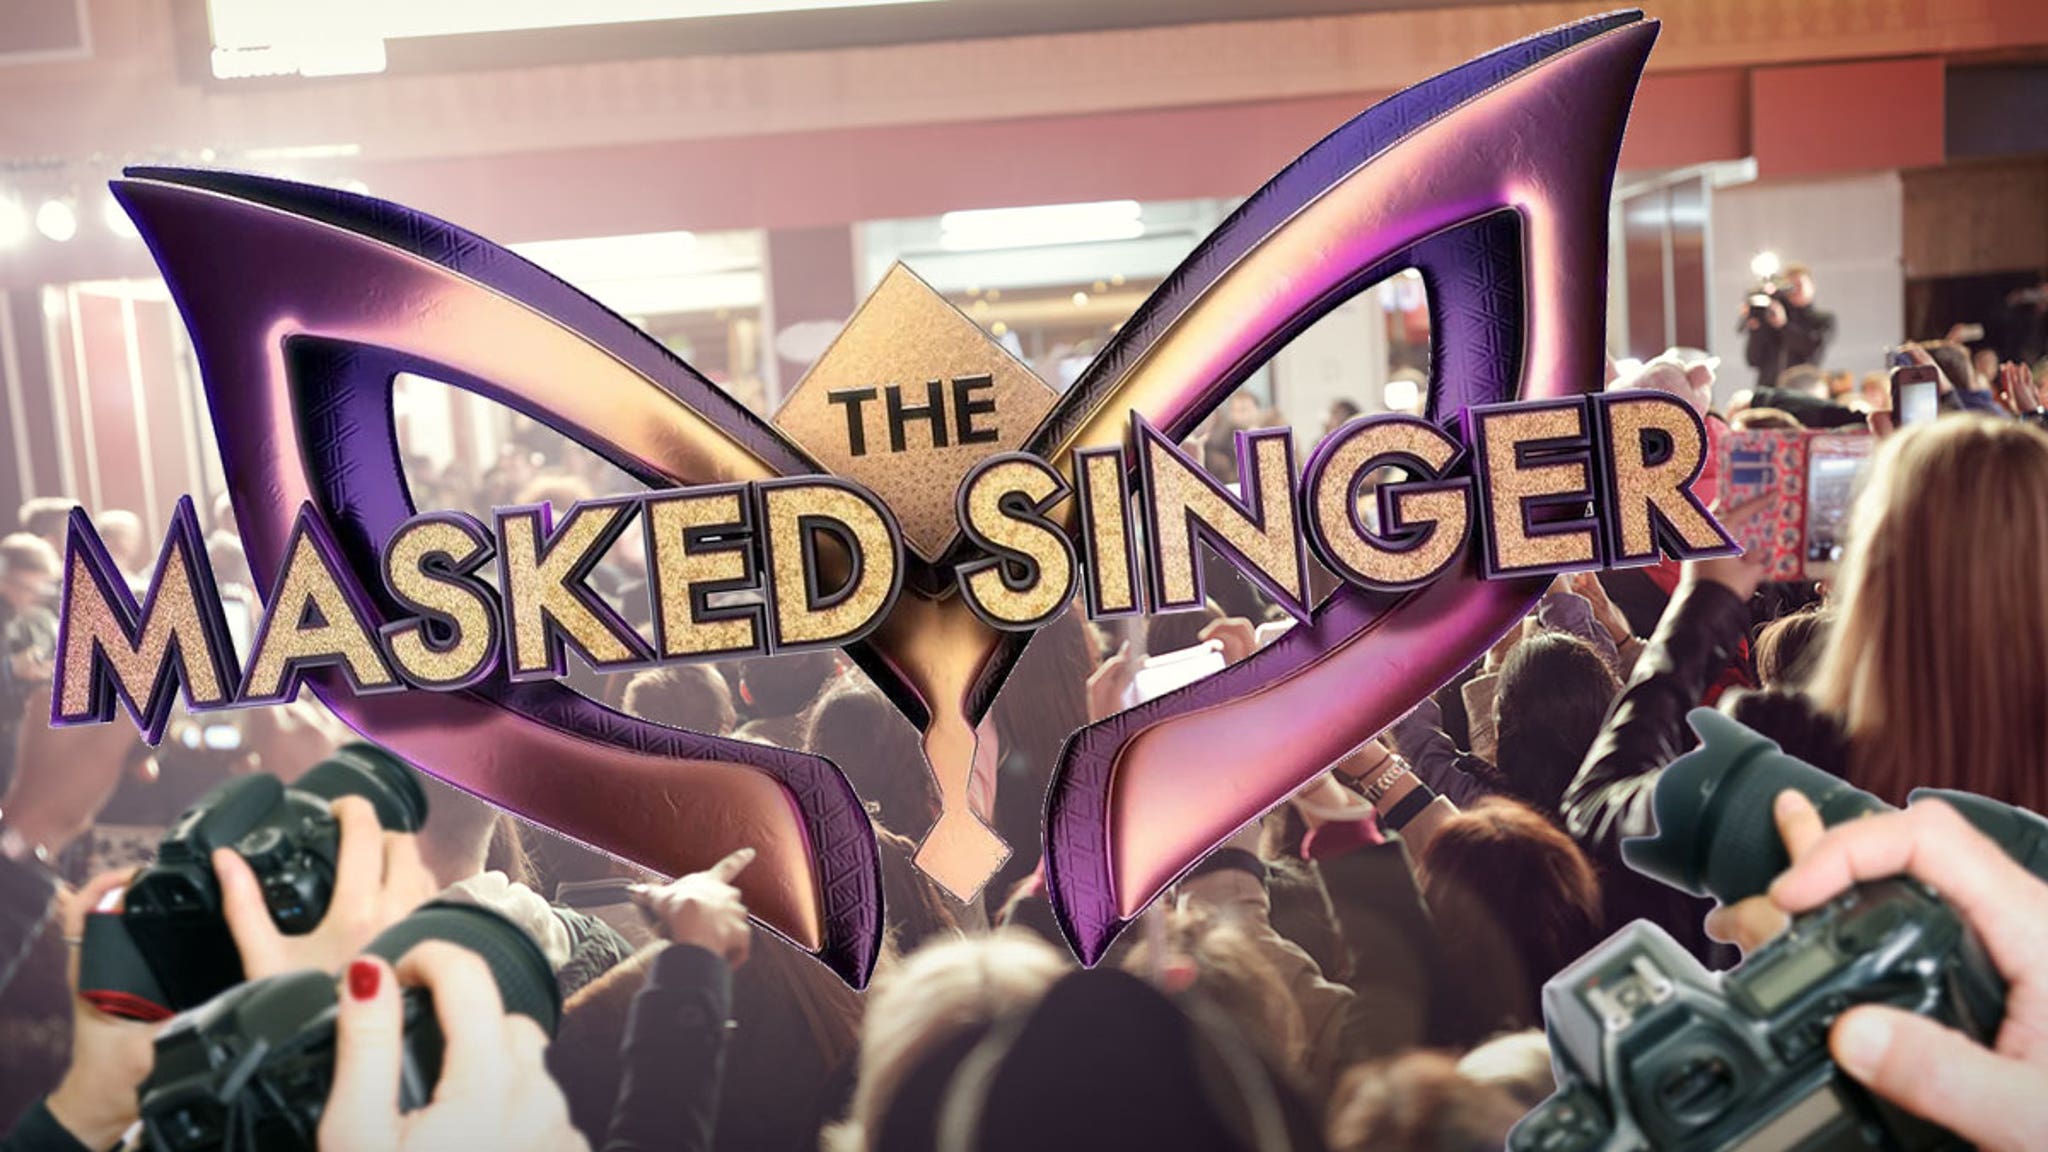 'The Masked Singer' Security Struggling to Keep Secrets from Swarming Fans thumbnail